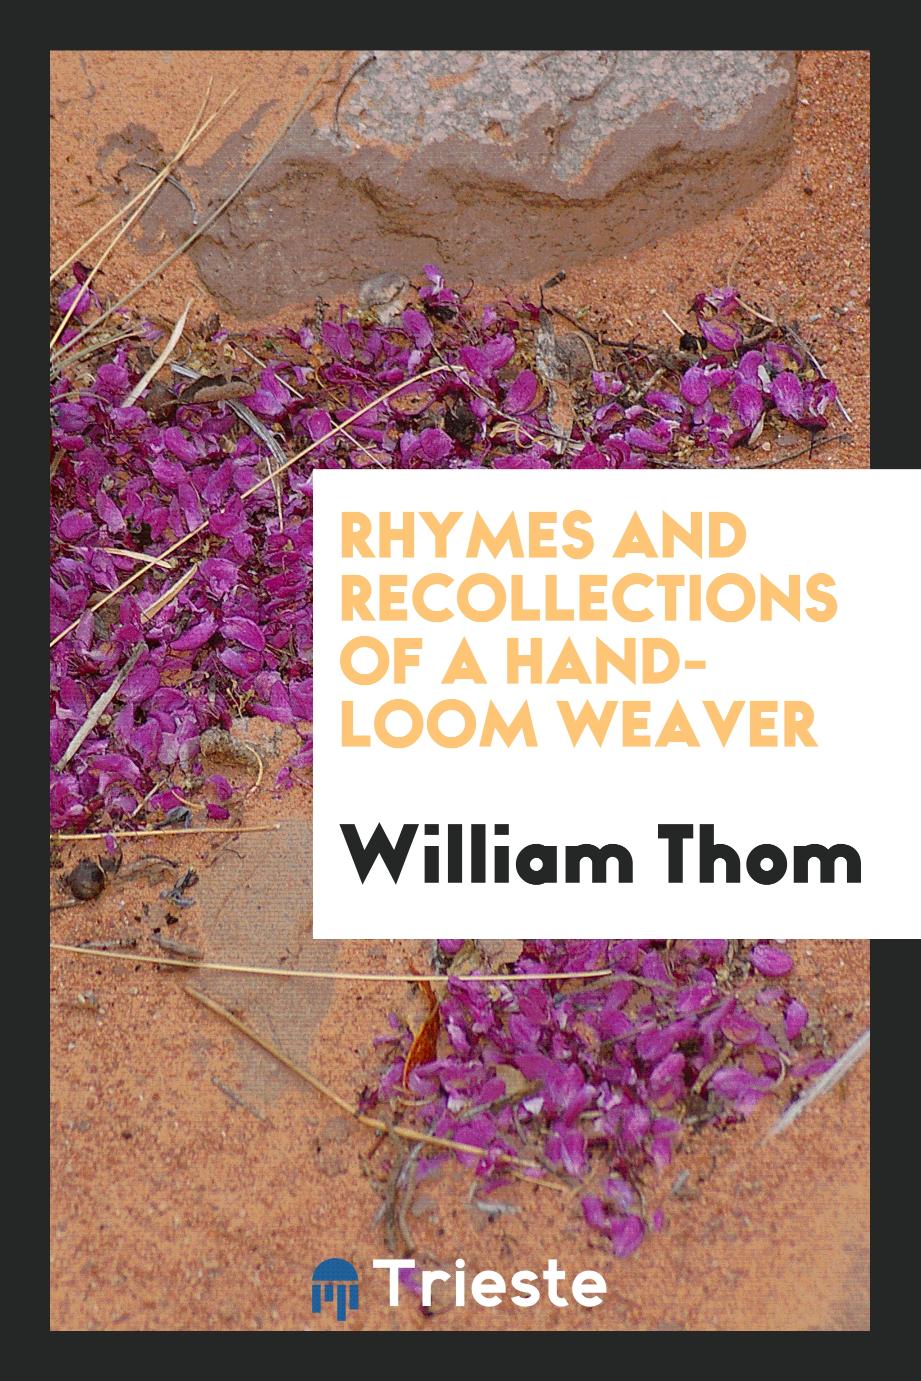 Rhymes and Recollections of a Hand-Loom Weaver